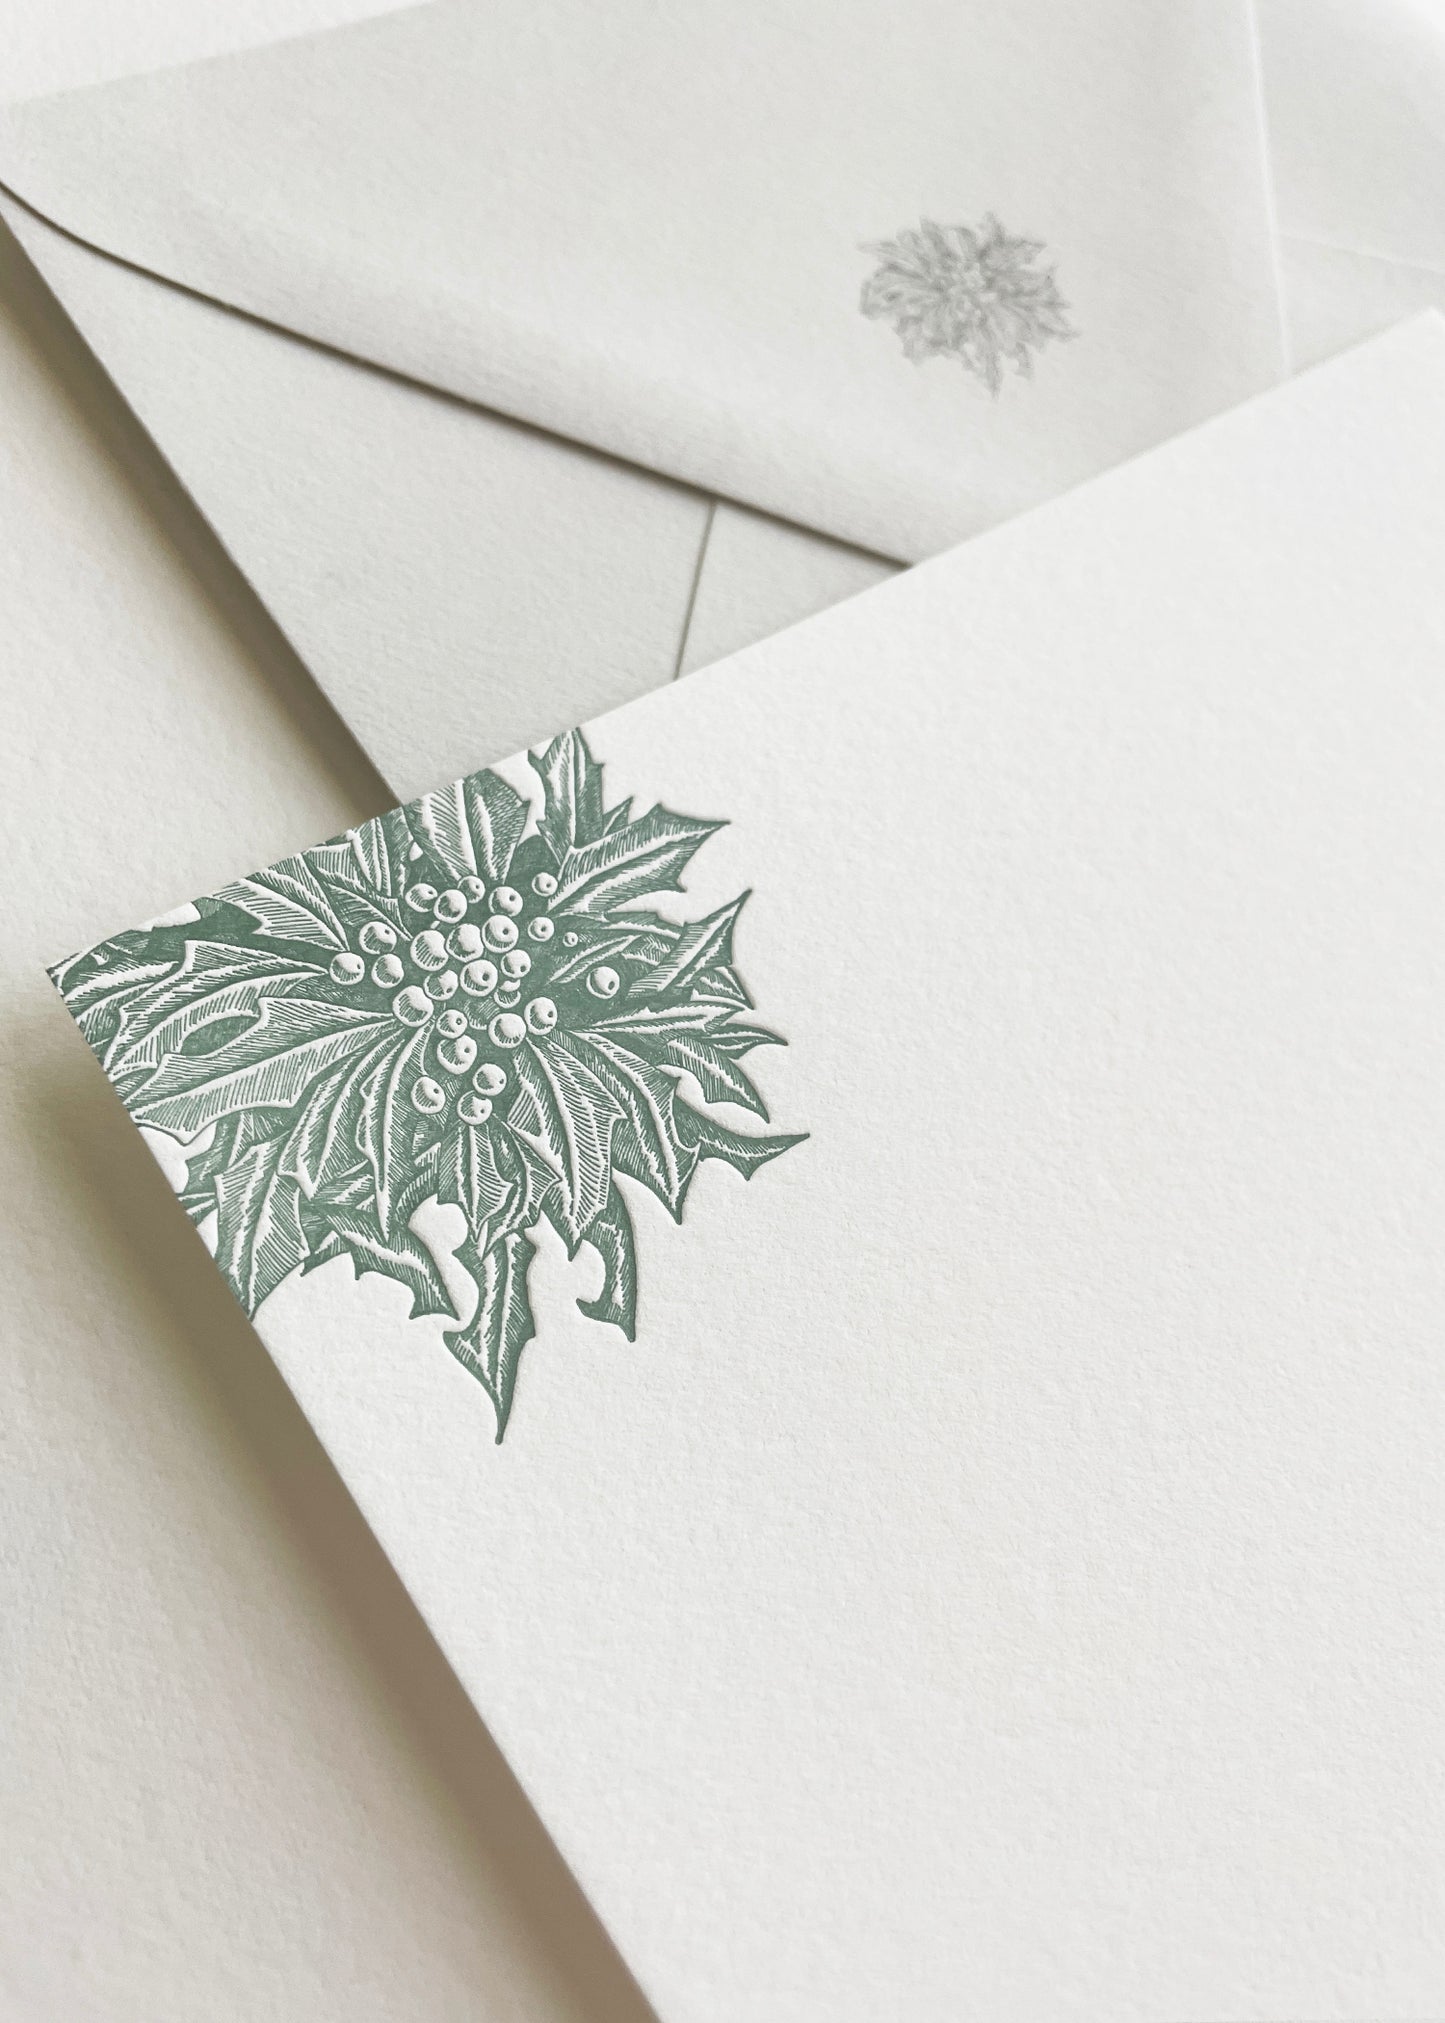 Letterpress flat note card with a green holly by Rust Belt Love